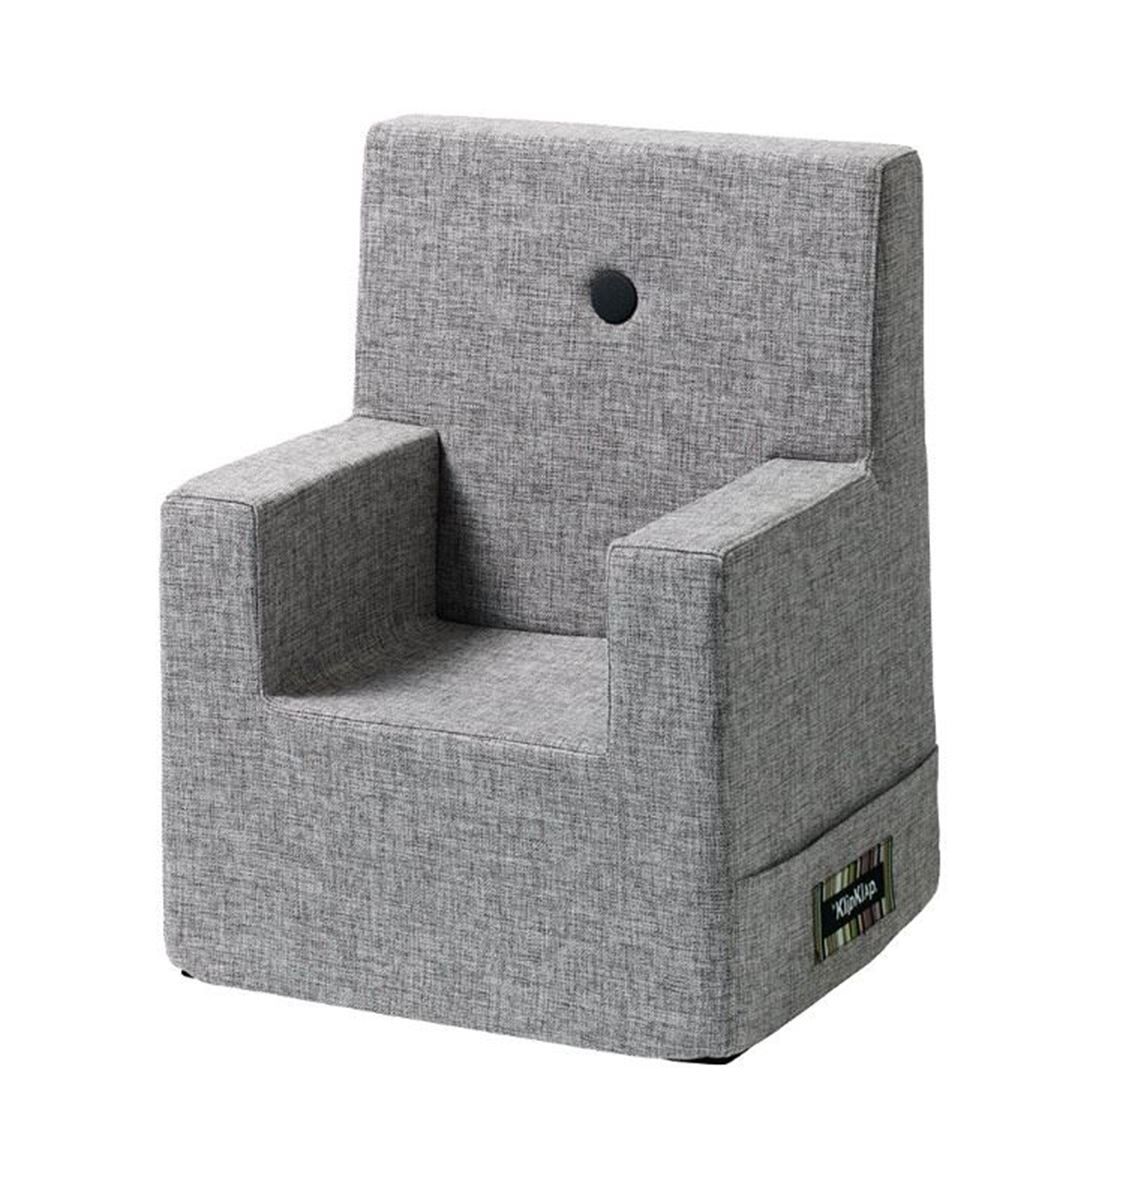 byKlipKlap Kids Chair XL - Multi grey with grey buttons